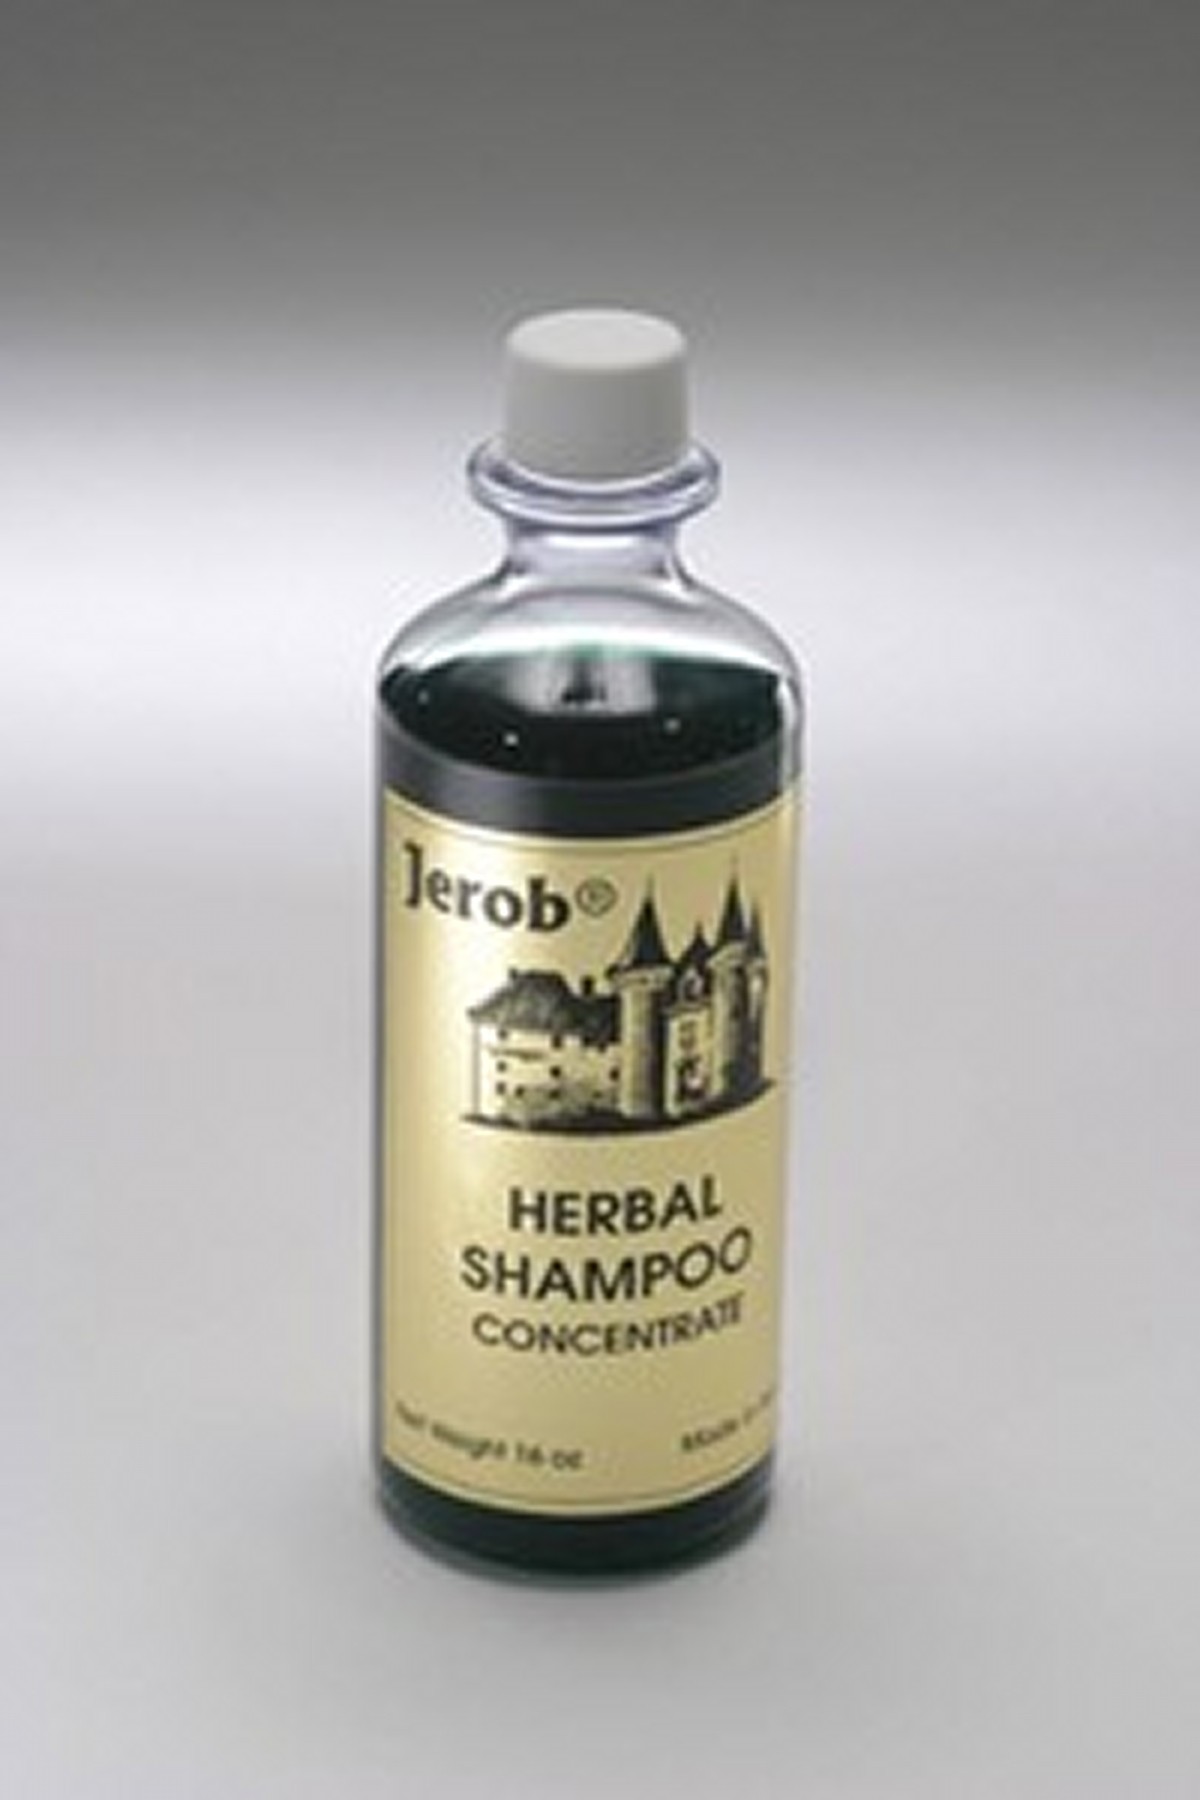 Jerob Shampoo Herbal Concentrate 236 ml